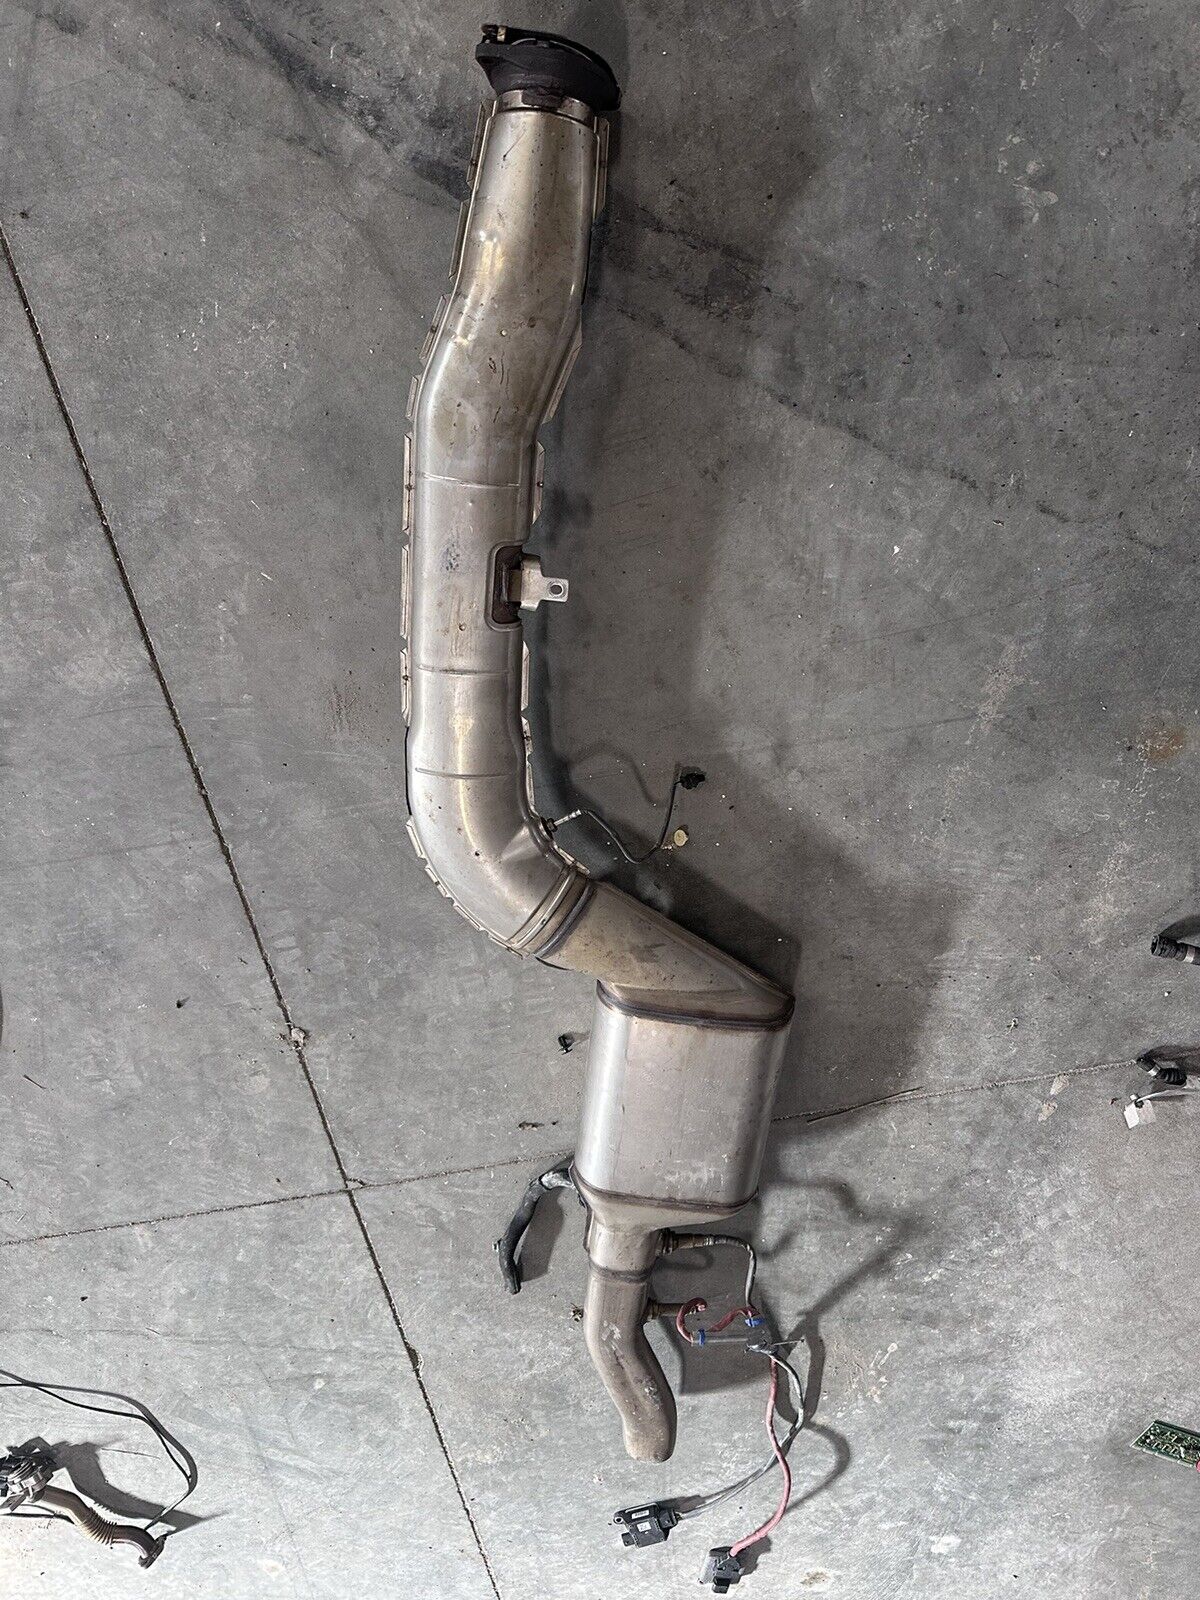 BMW F10 Scr resonator after DPF exhaust 2014 535d 30k Miles With Sensors 